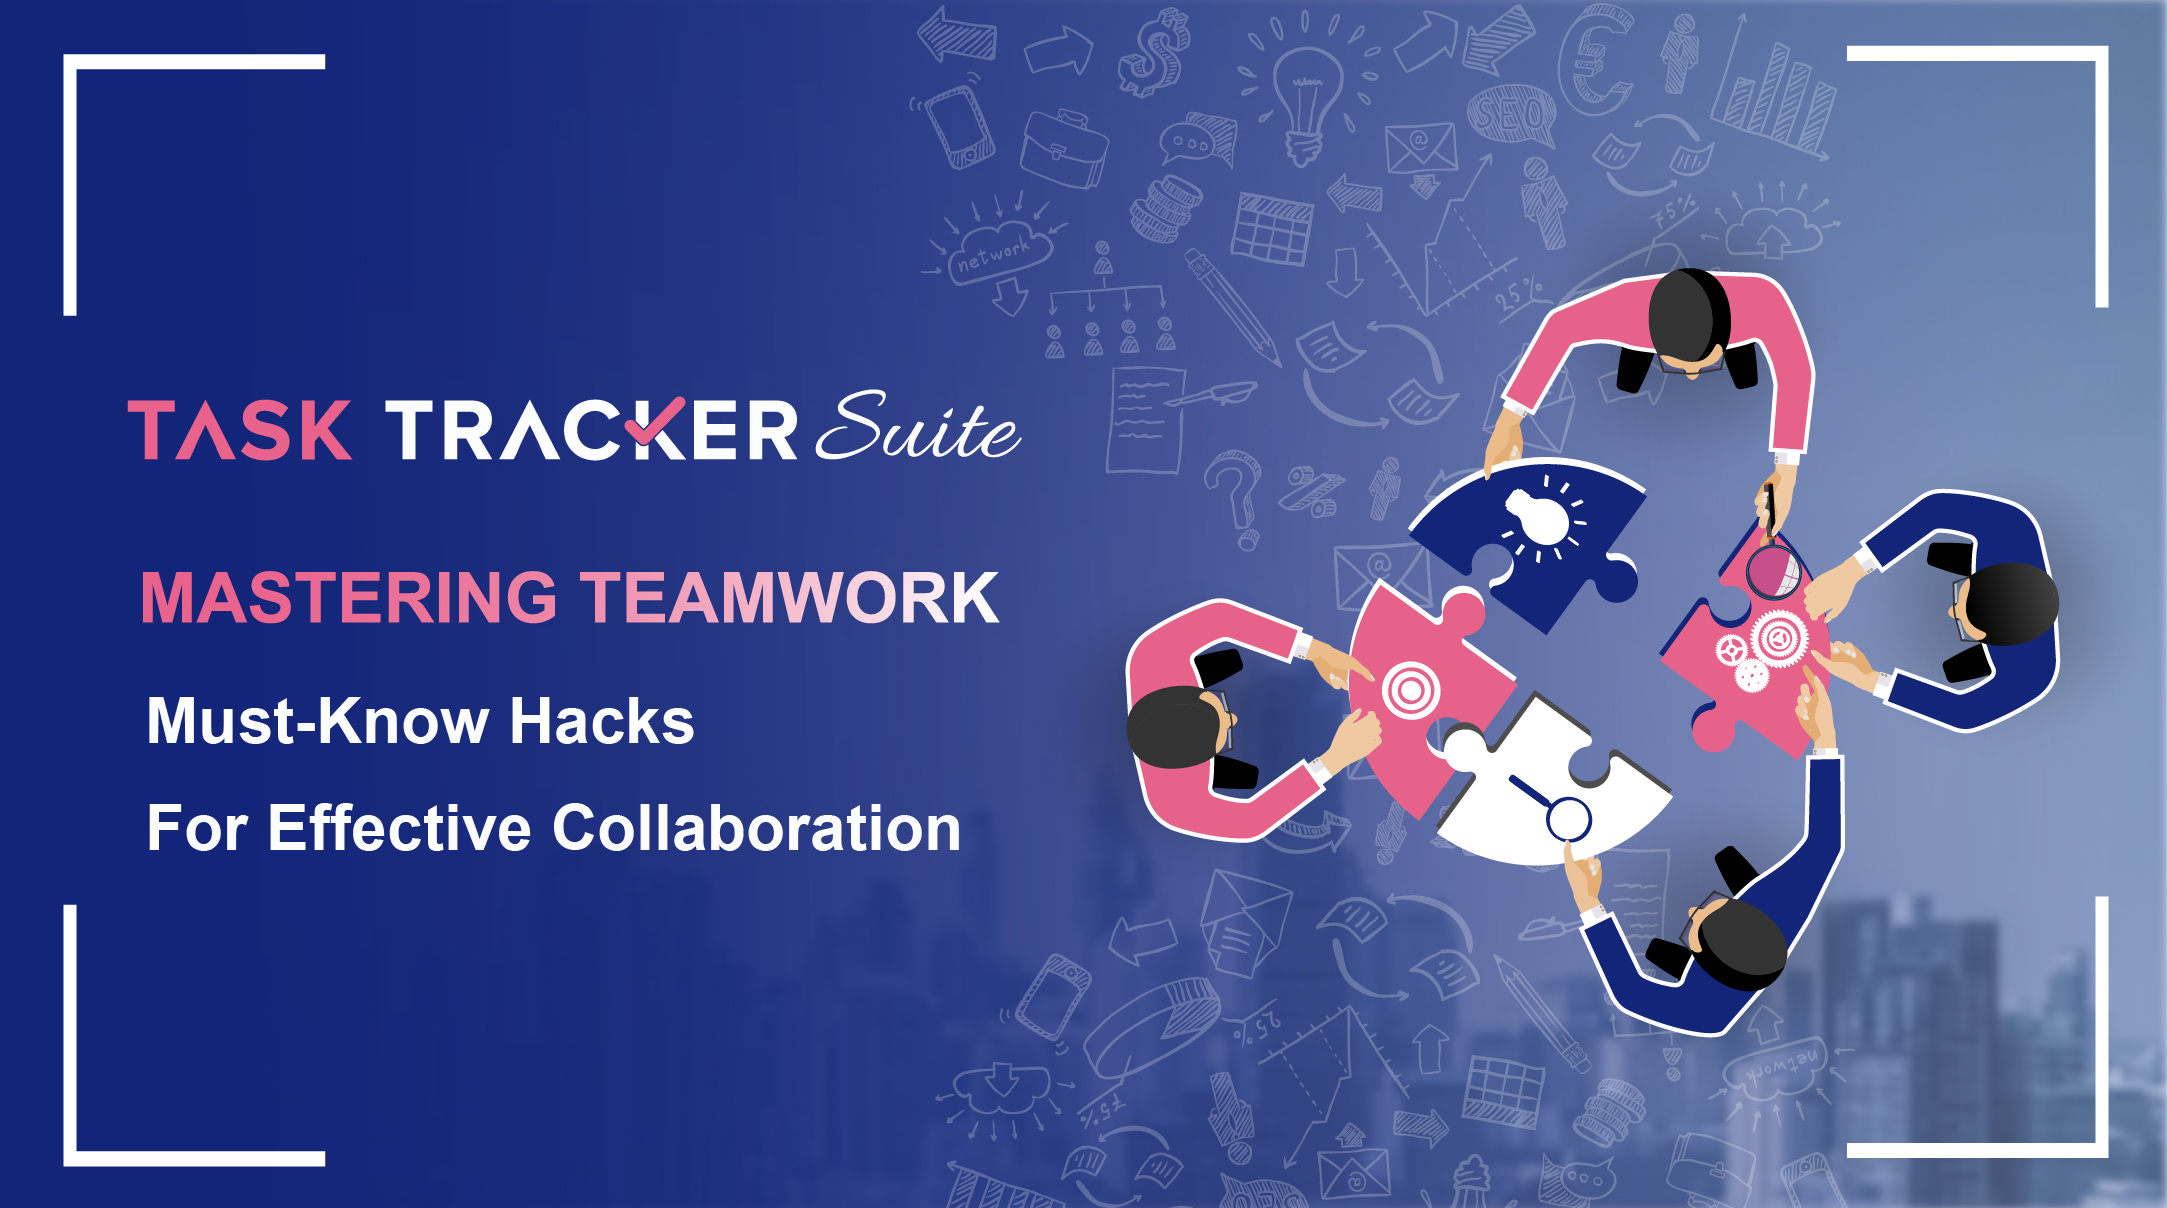 5 Hacks to improve employee communication and collaboration at the workplace